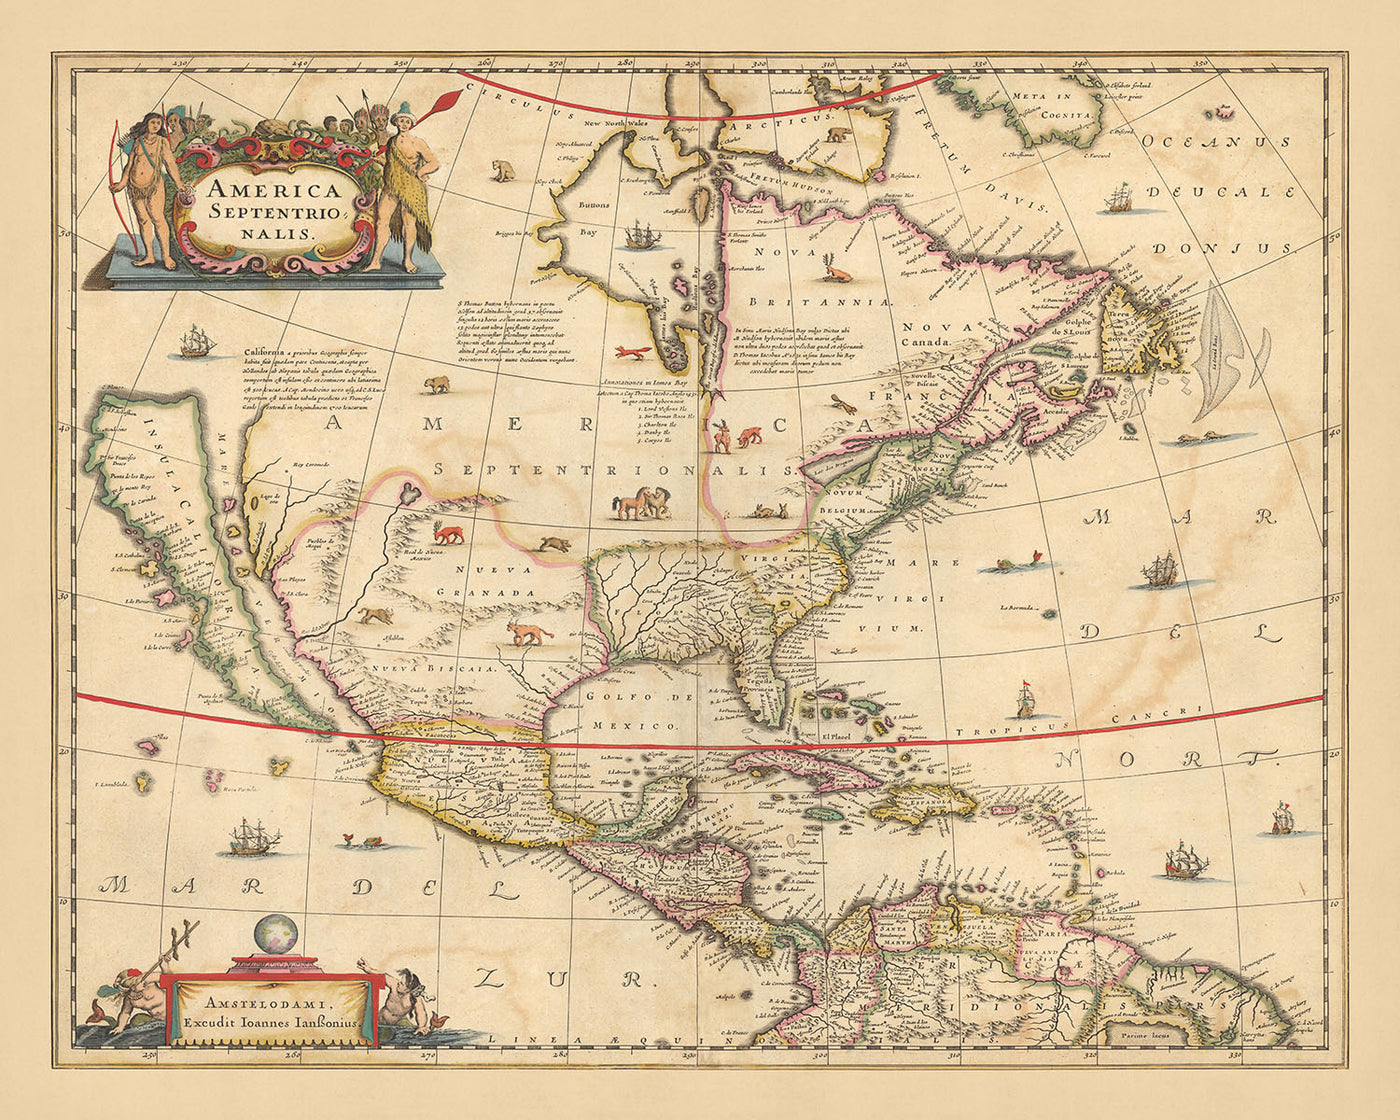 Old Map of North America by Visscher, 1690: Central America, Caribbean, Mexico City, Washington, Bermuda Triangle